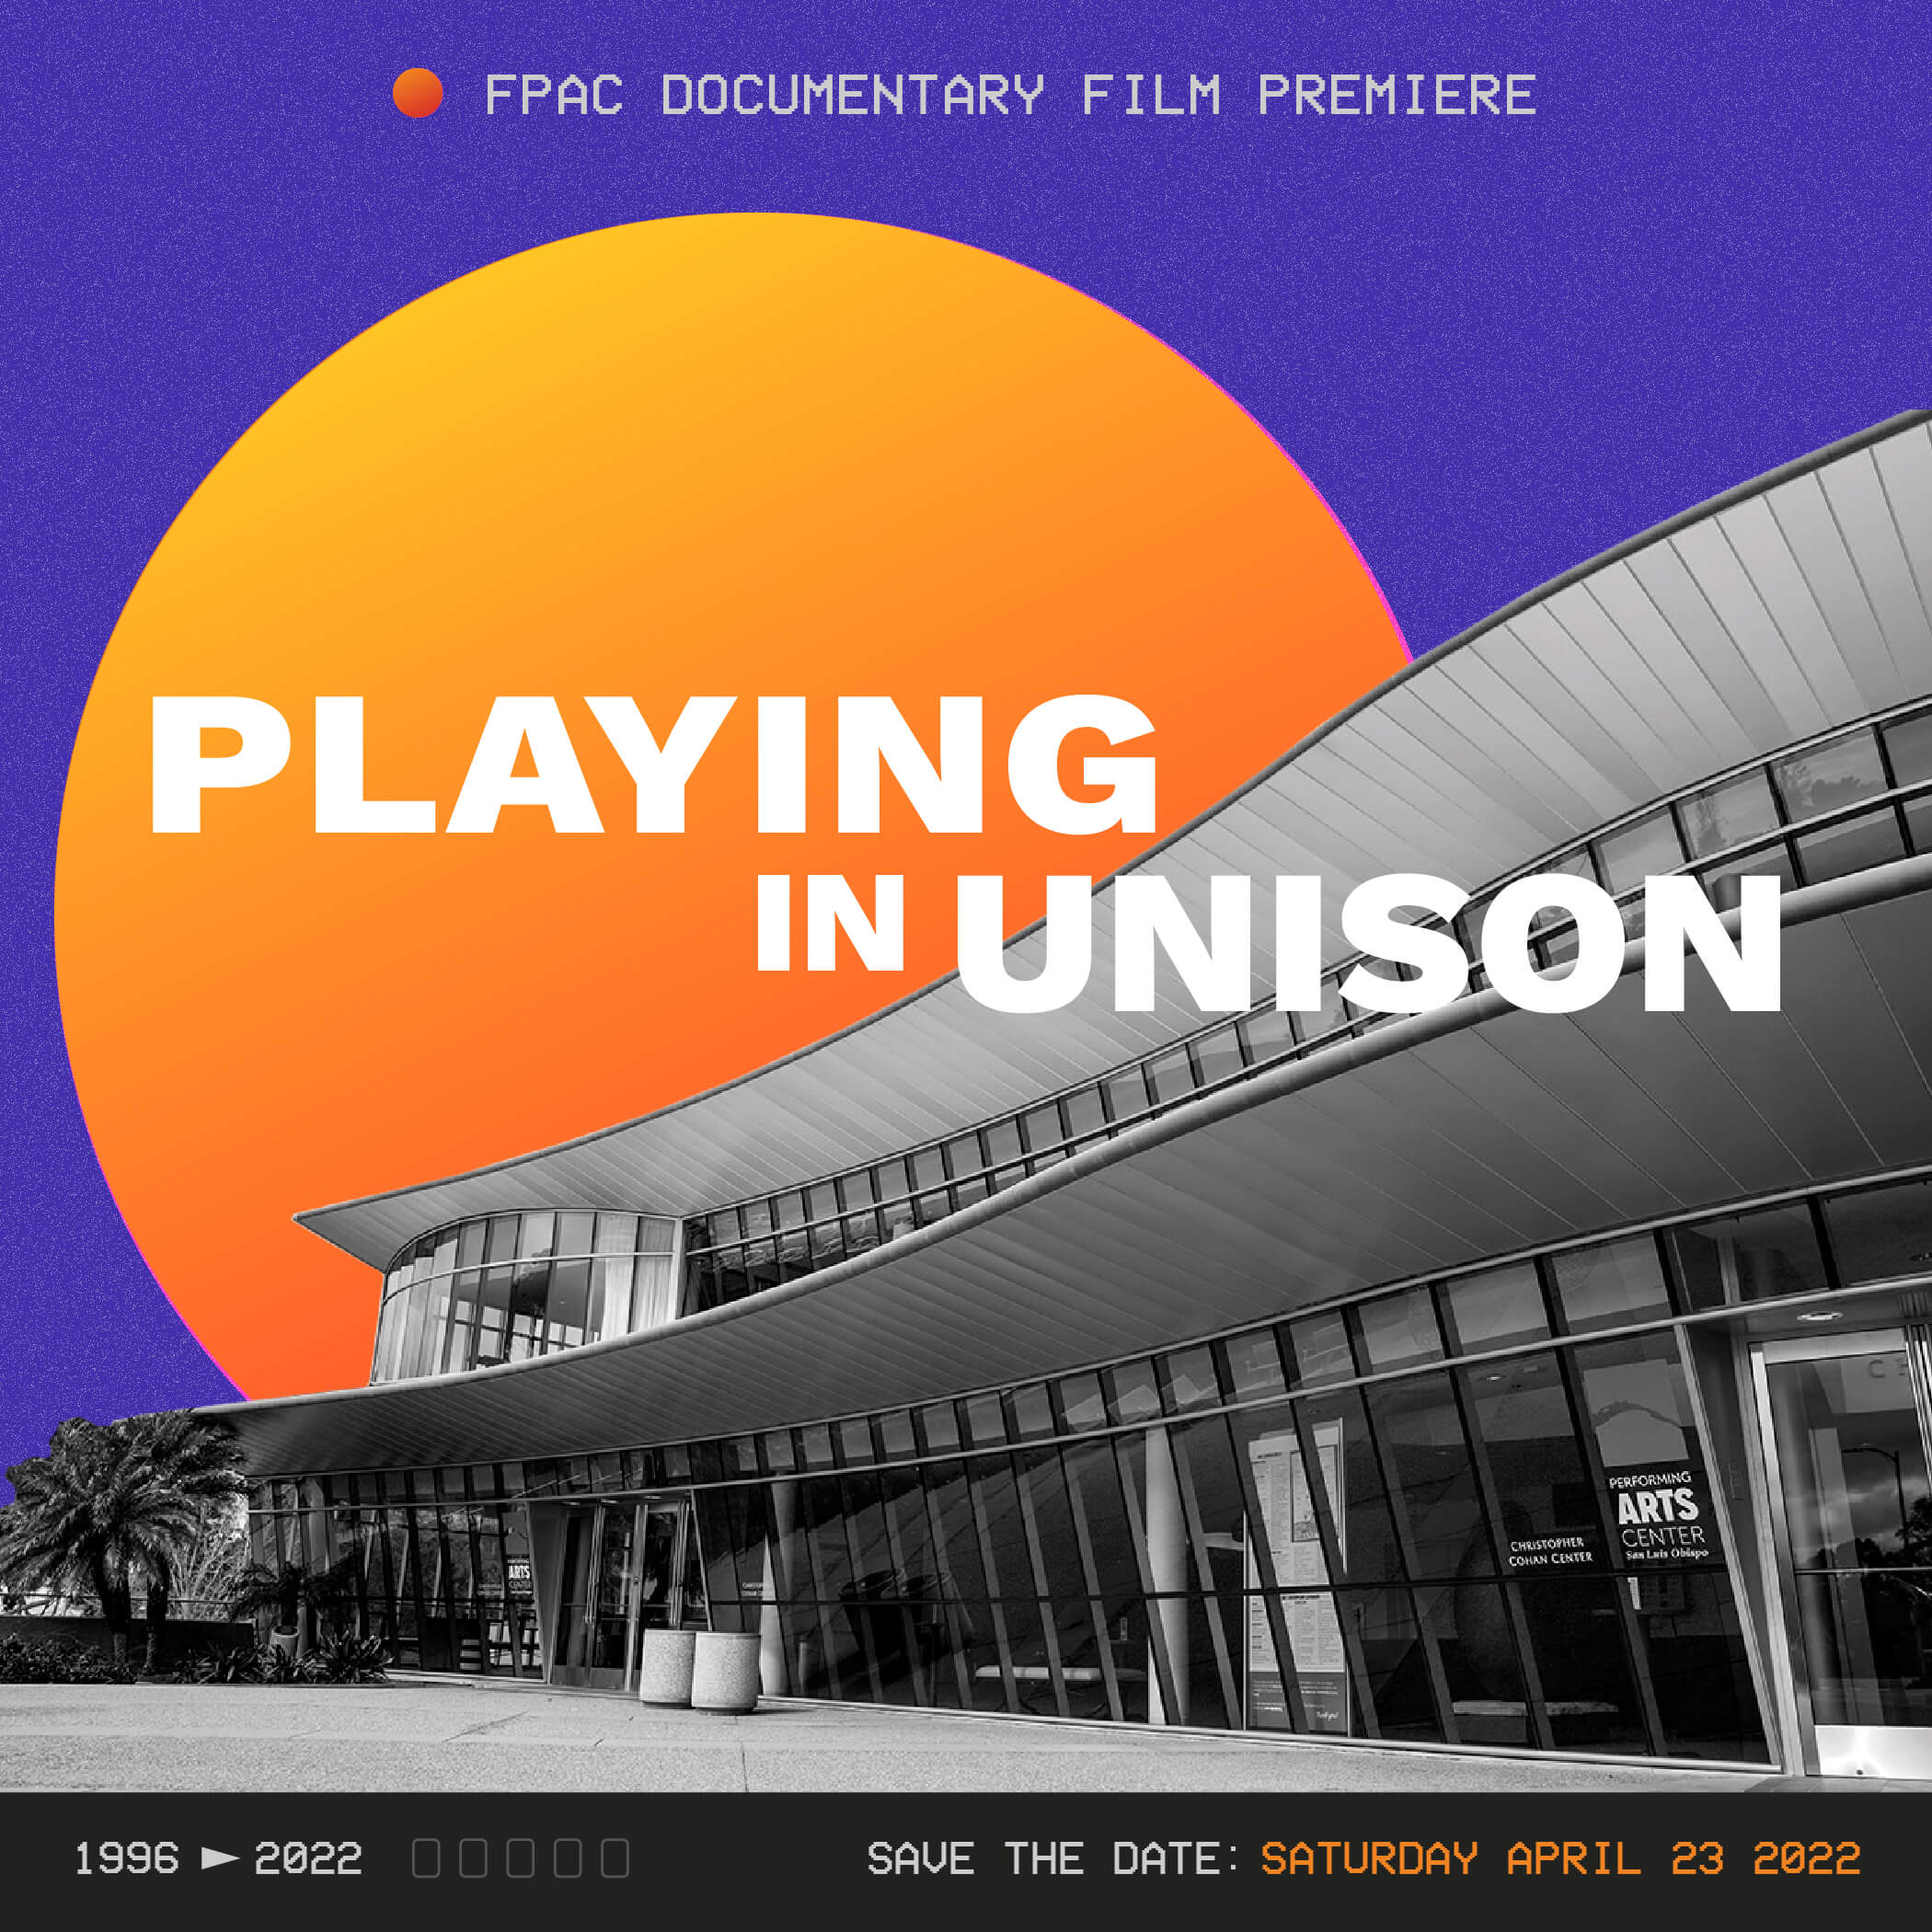 Playing in Unison film premiere event image